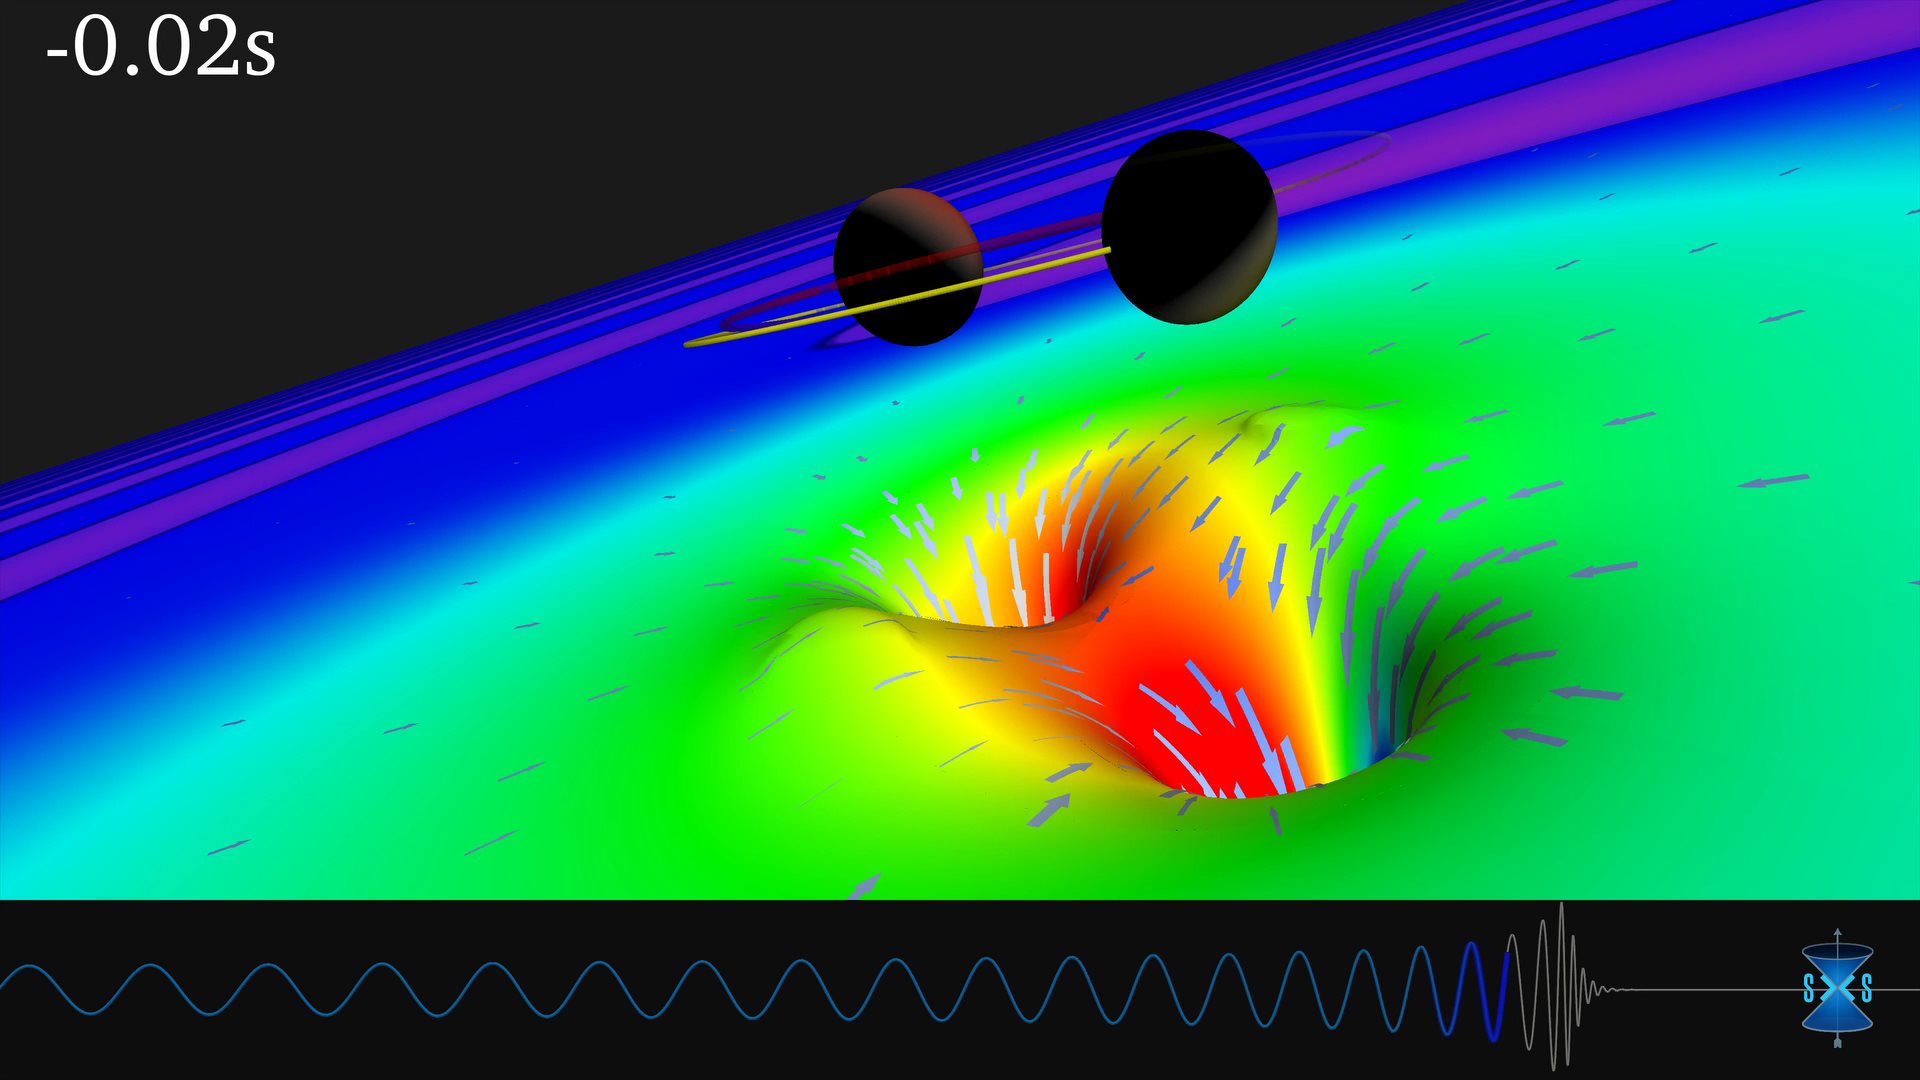 GW170104 received GW plots_Warped Spacetime BBH Simulation_by Simulating eXtreme Spacetimes (SXS) Project-LIGO_Snapshot - 32_1920w_1080w.jpg